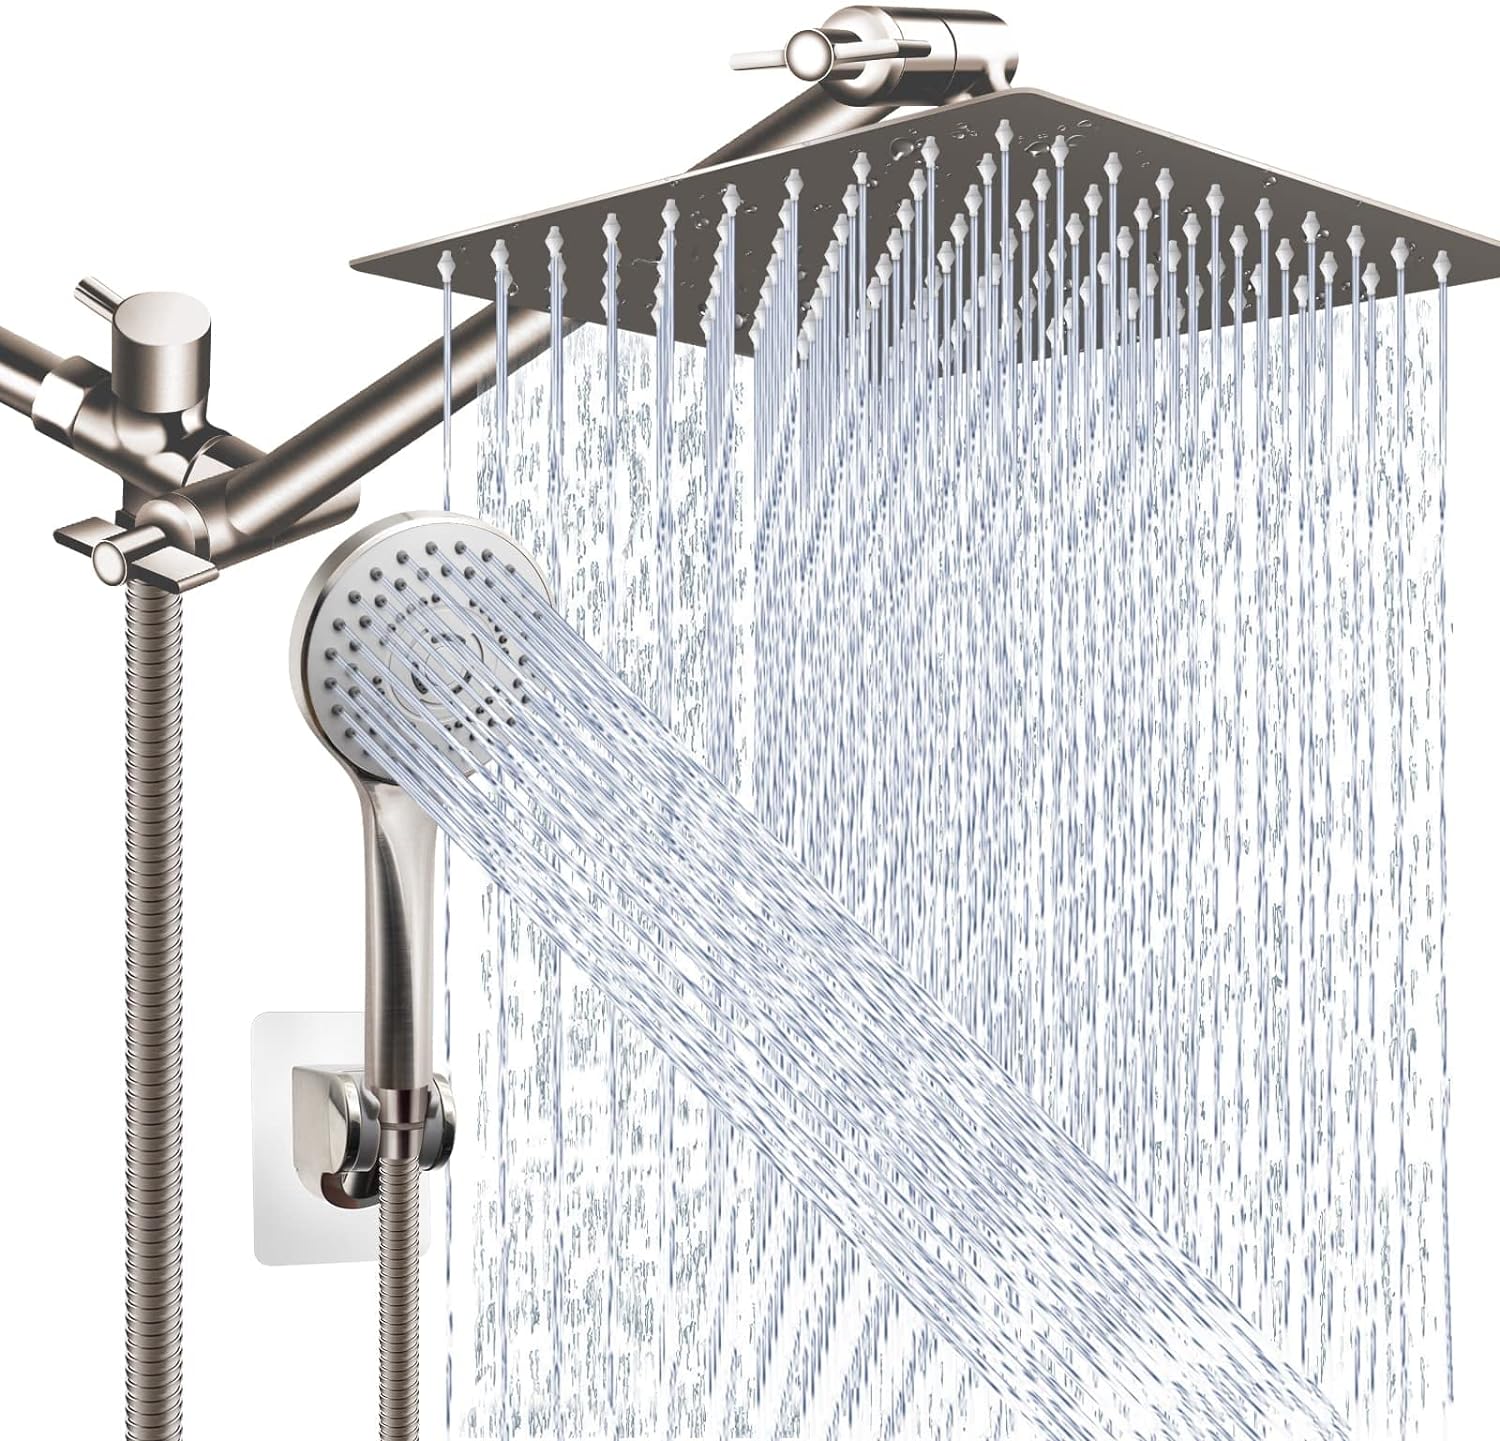 PinWin Shower Head Combo(Brushed Nickel),10'' High Pressure Rain Shower Head with 11'' Adjustable Extension Arm and 5 Settings Handhel